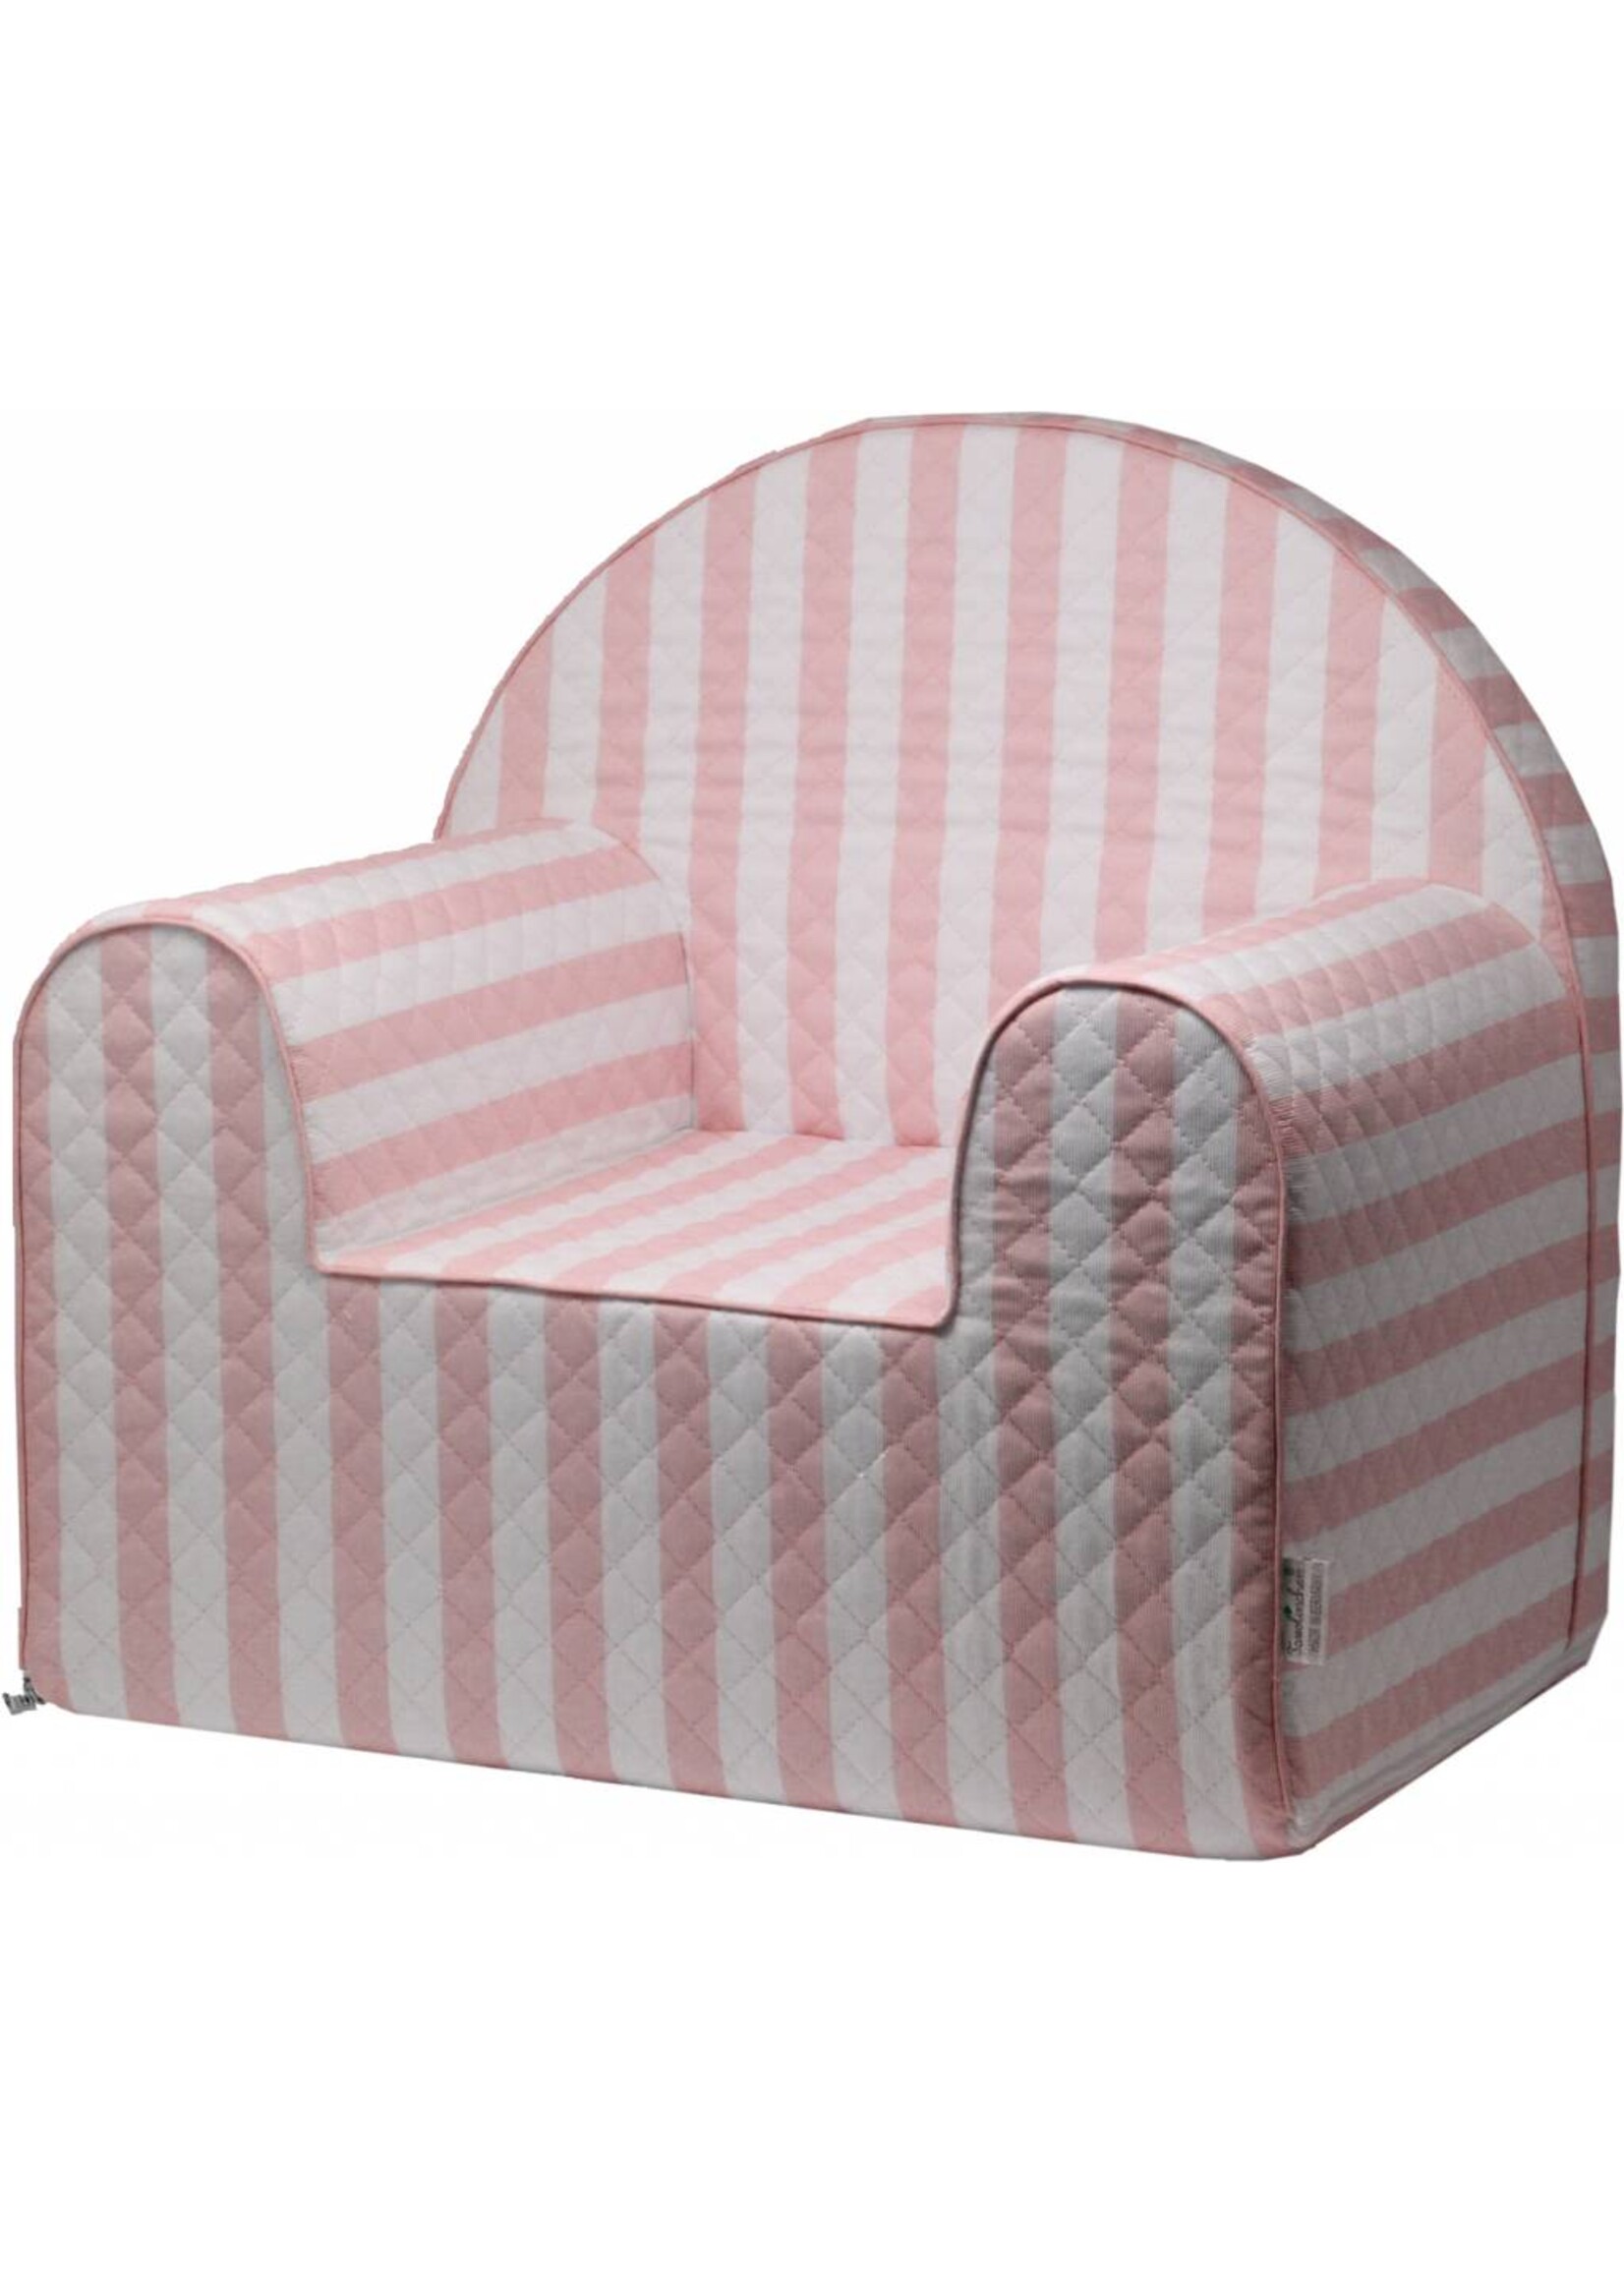 Little Chic by TAVO Little Chic by TAVO Dog / Cat Armchair "Stripes"